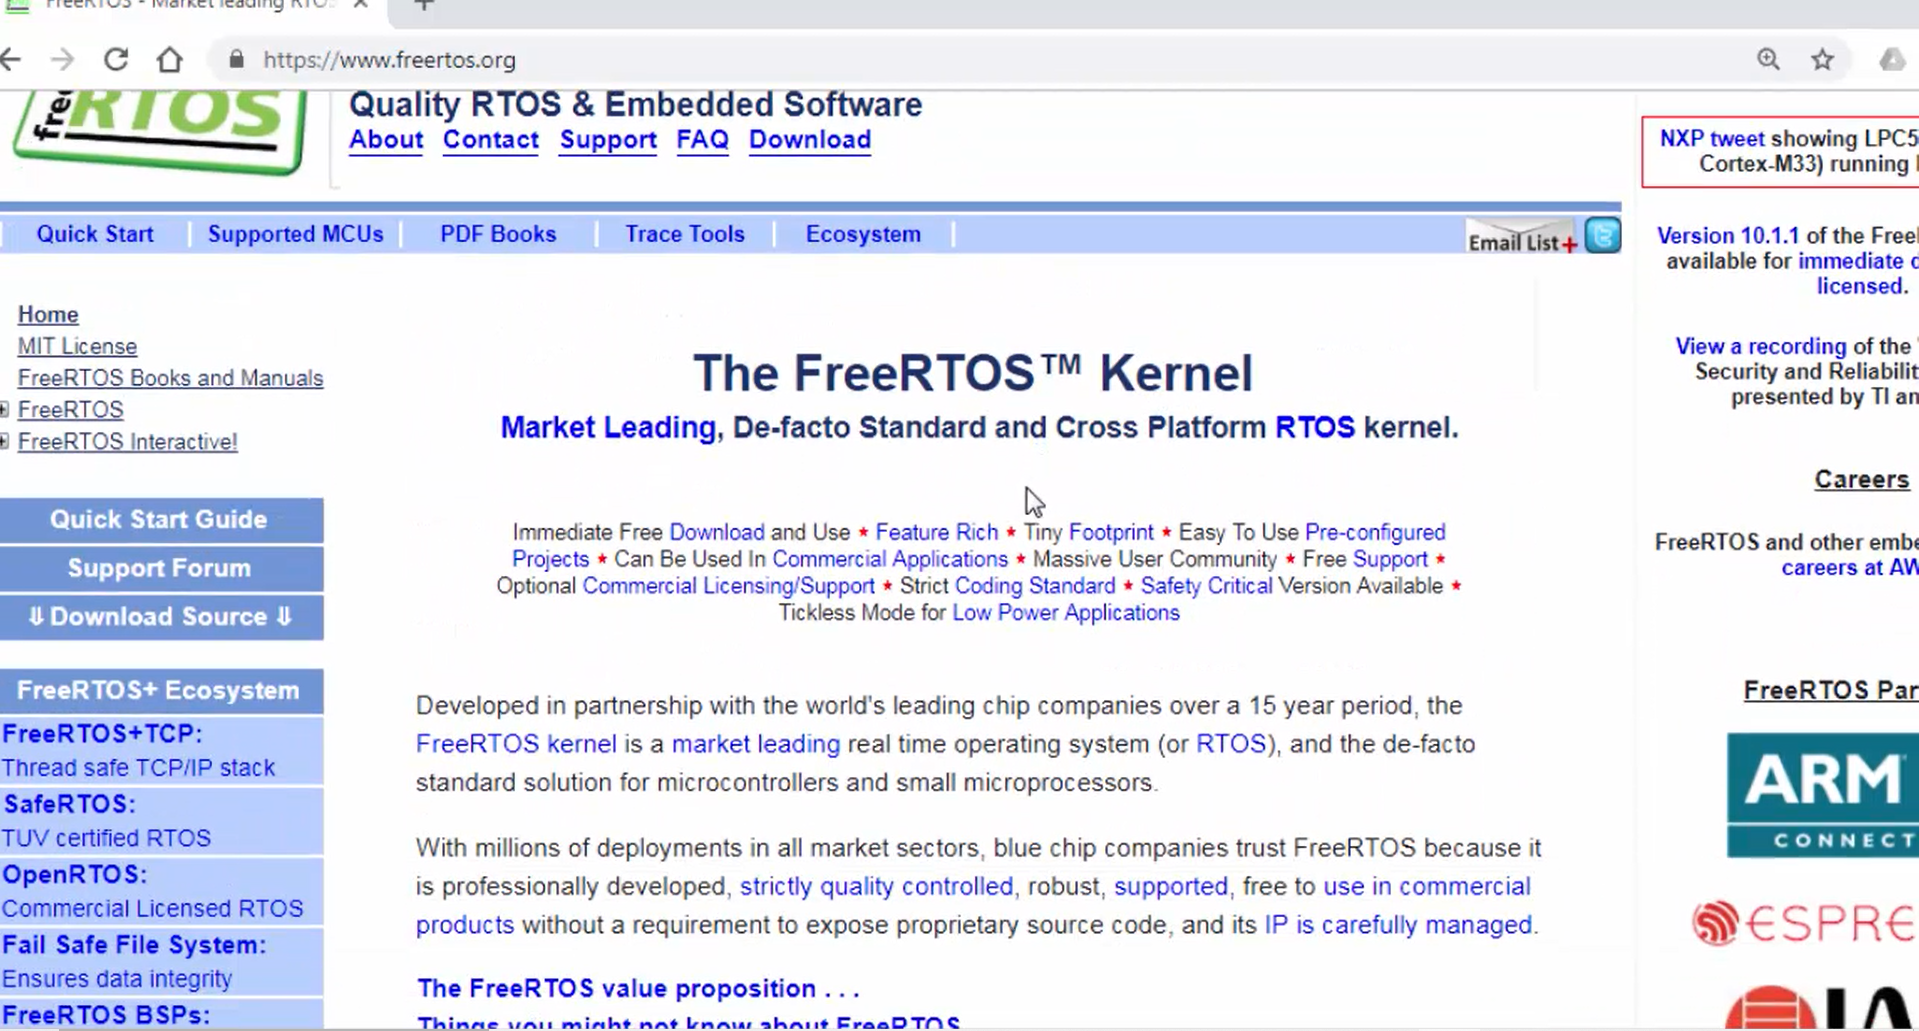 Official web page of FreeRTOS